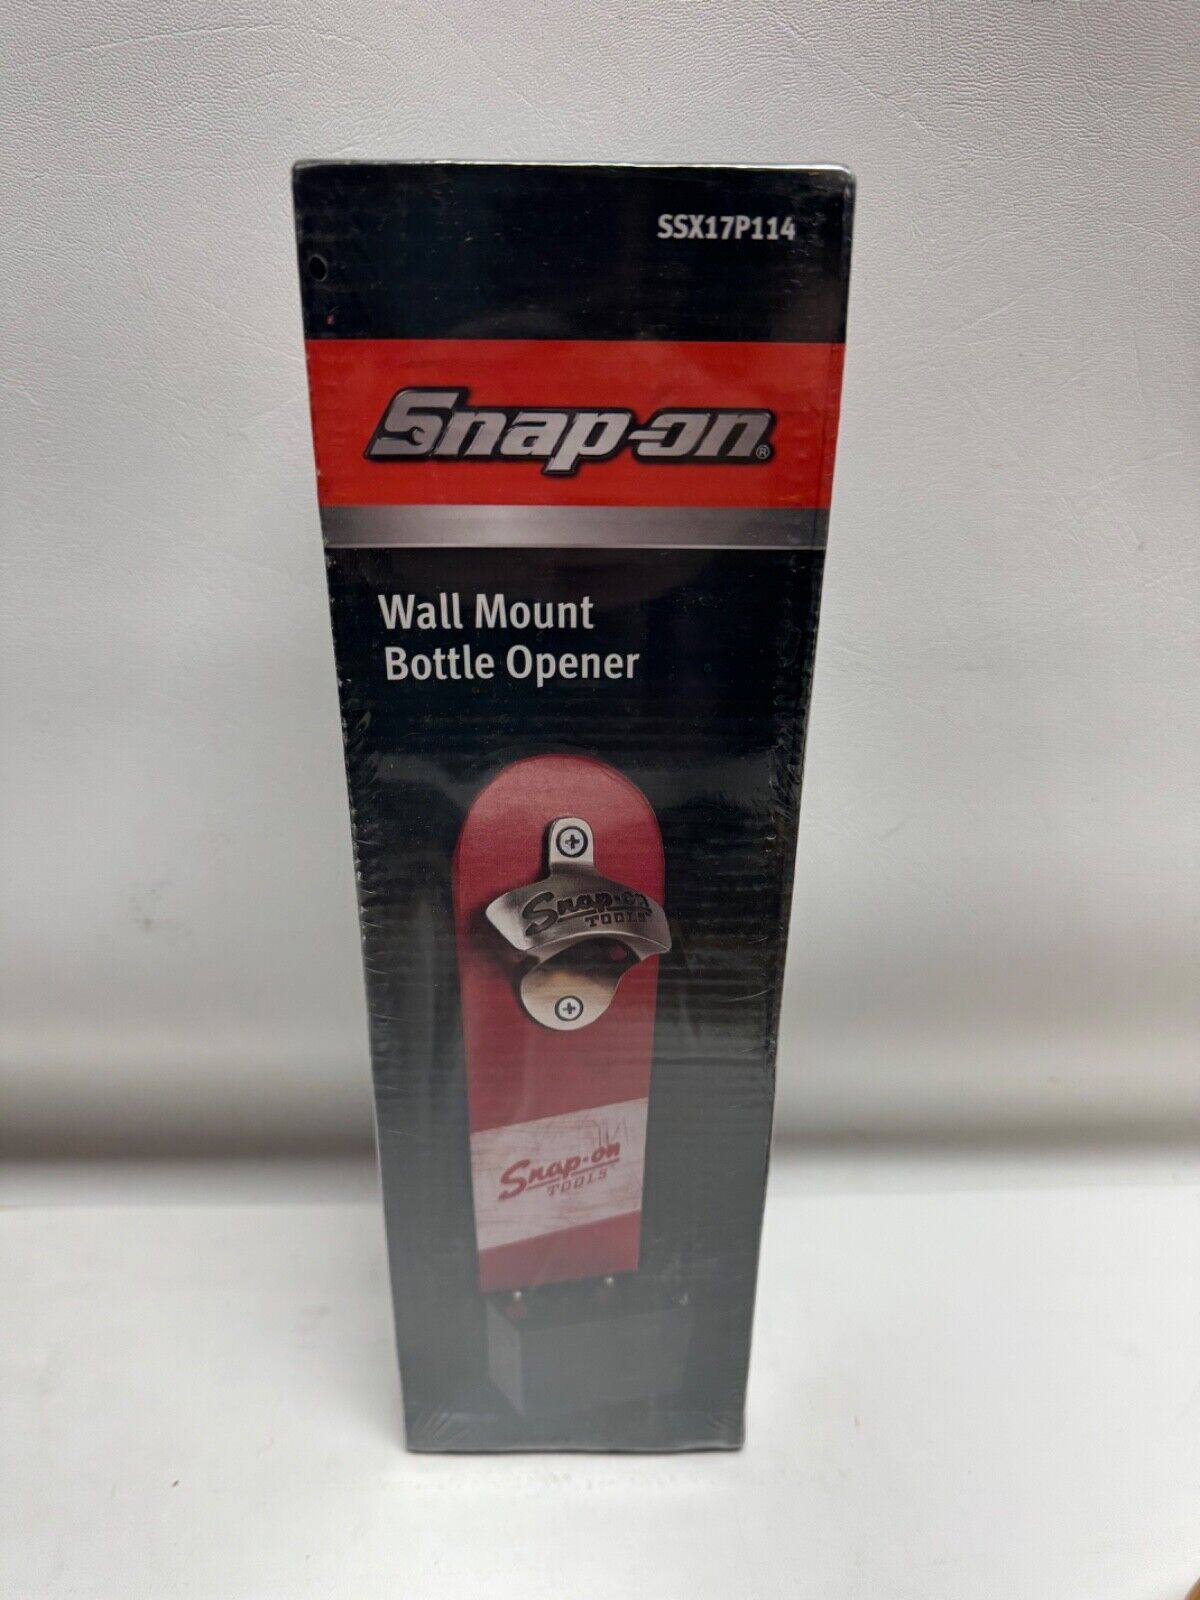 Snap-On Tools - Wall Mount Bottle Opener - SSX17P114 - SEALED - New in Box